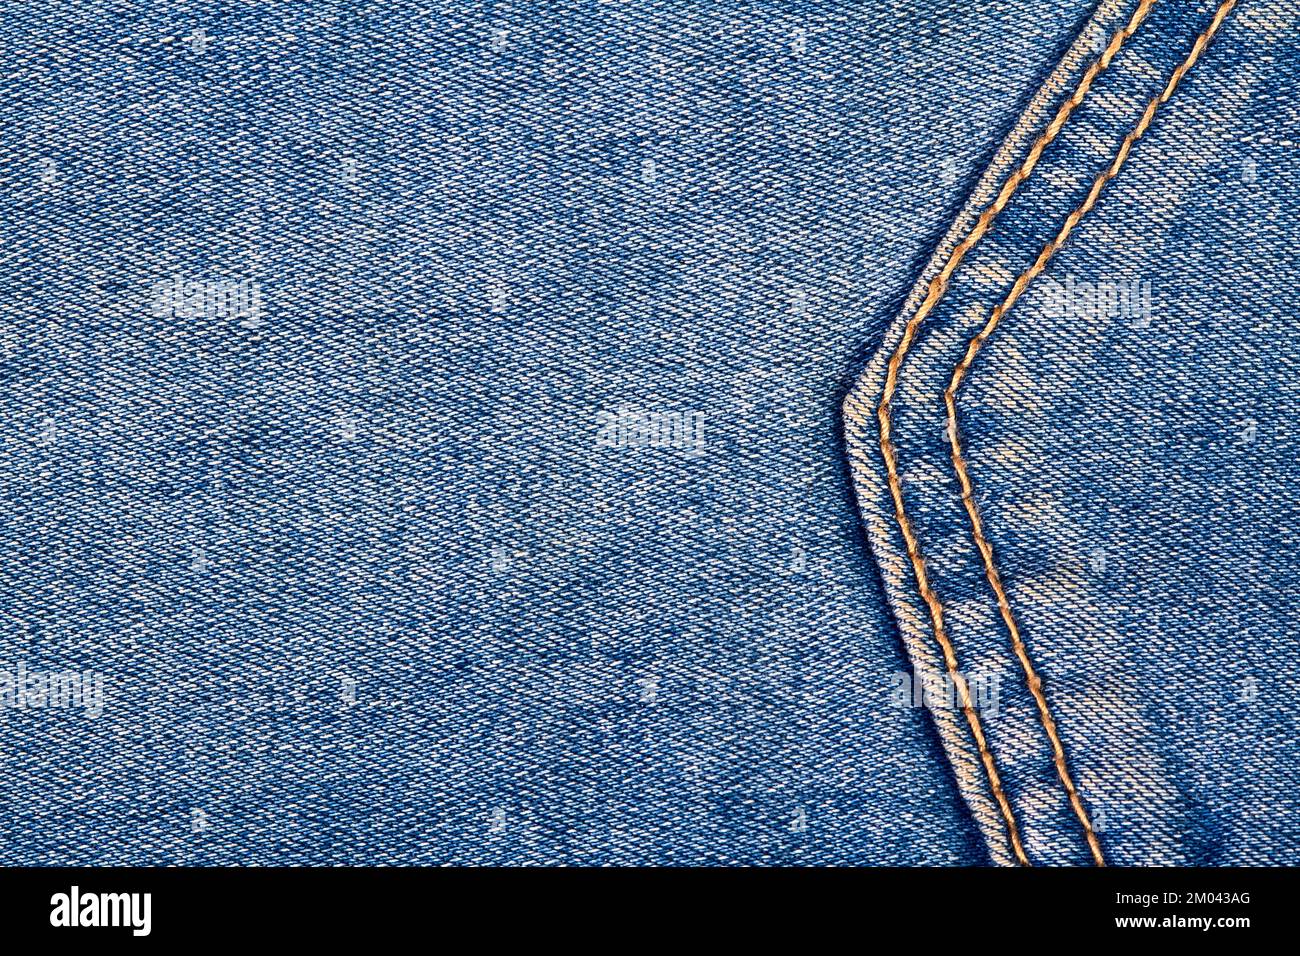 Premium Photo  Part of a blue denim jeans background pocket with damage  and seams with orange thread stitches